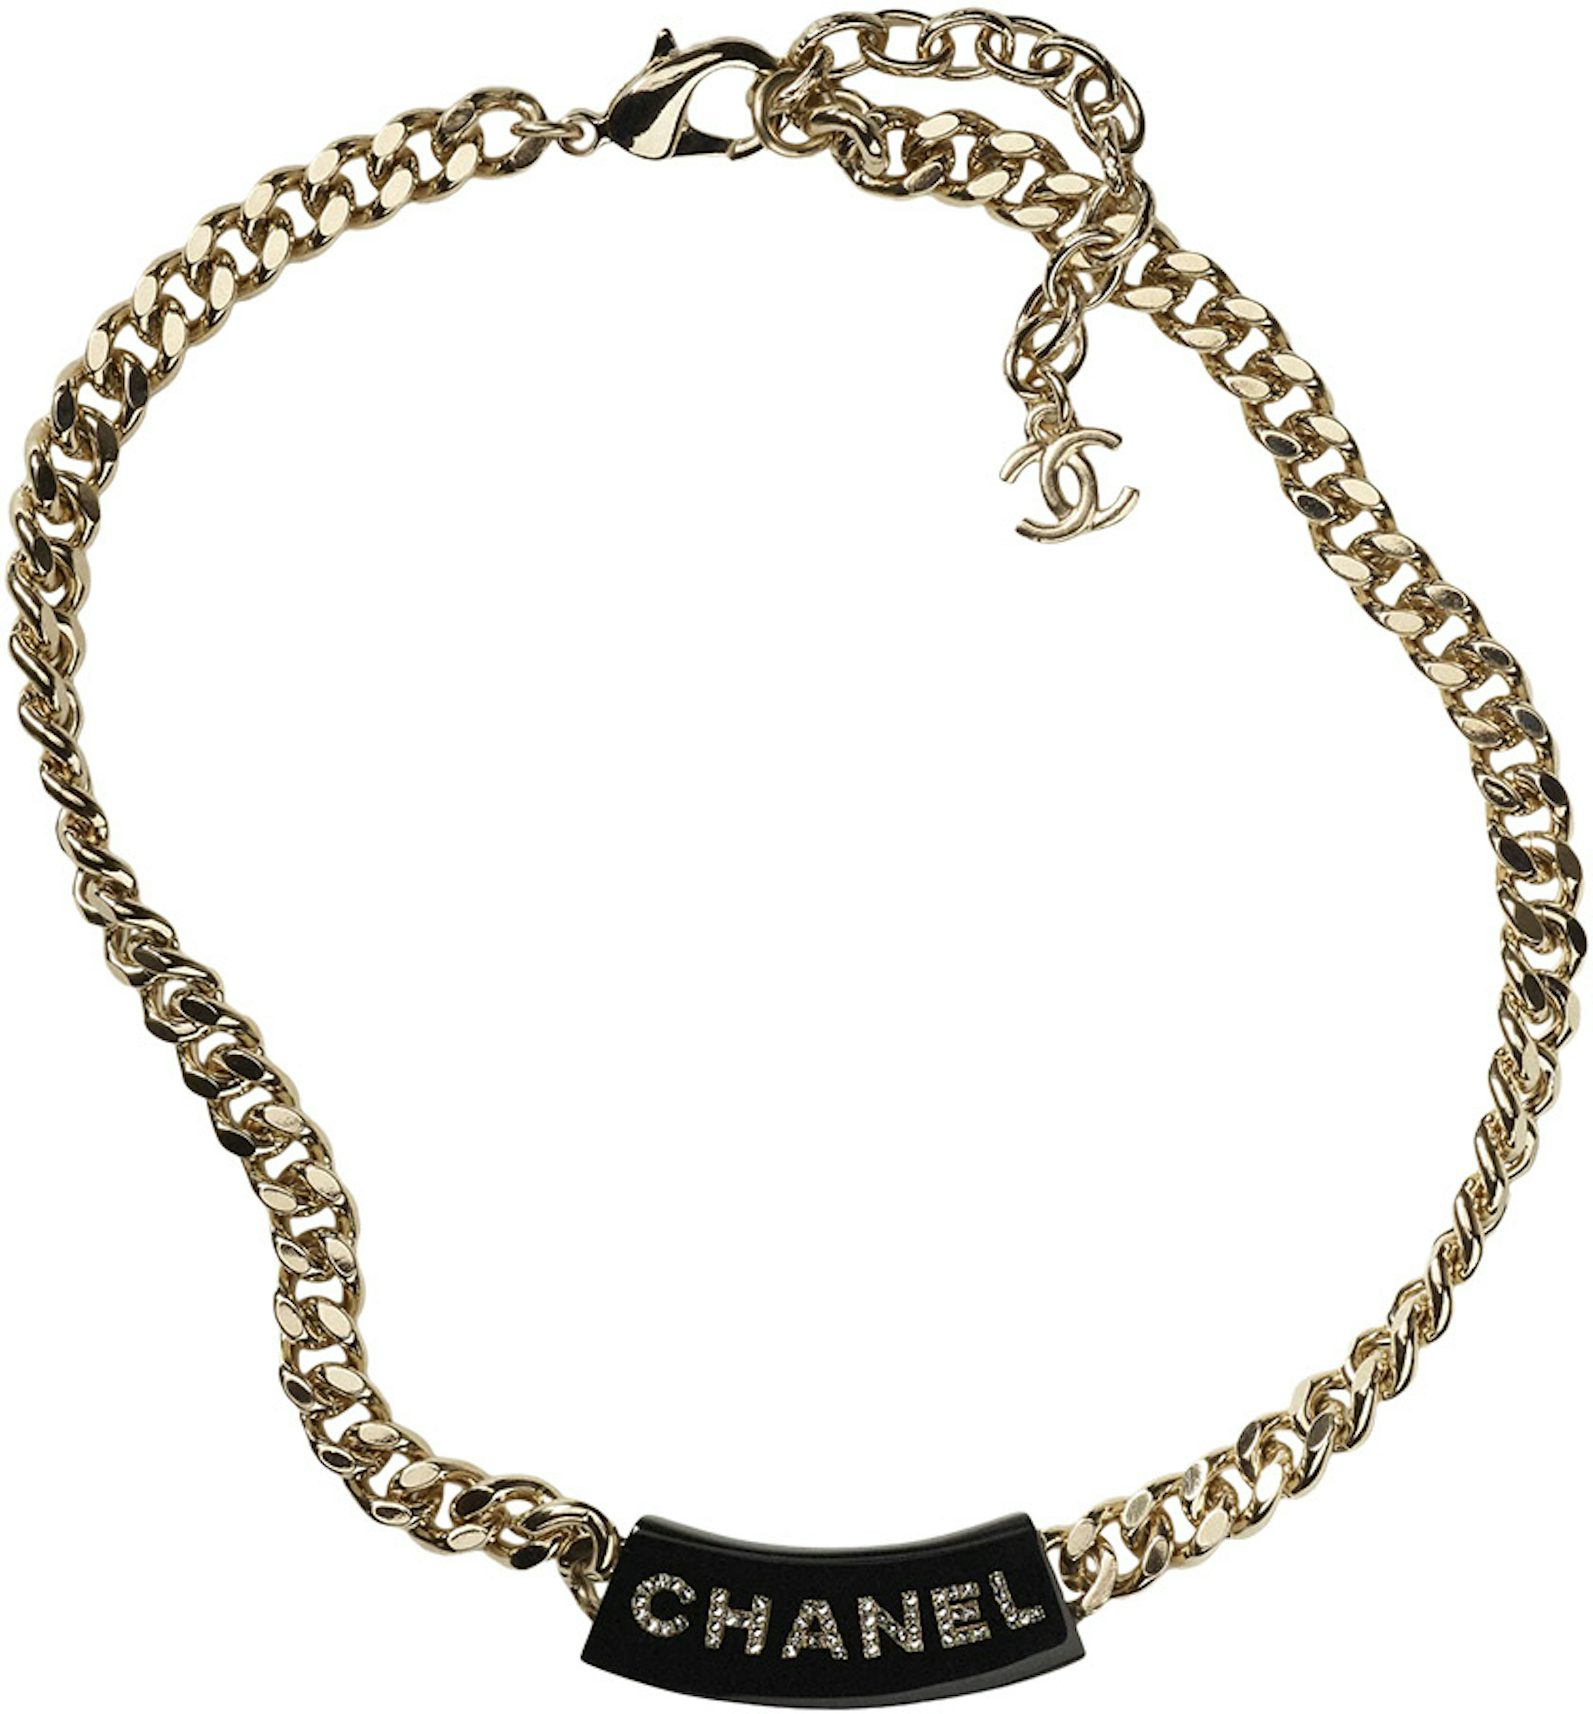 Chanel Gold Necklace AB9374 Gold/Black in Gold Metal/Resin/Crystal